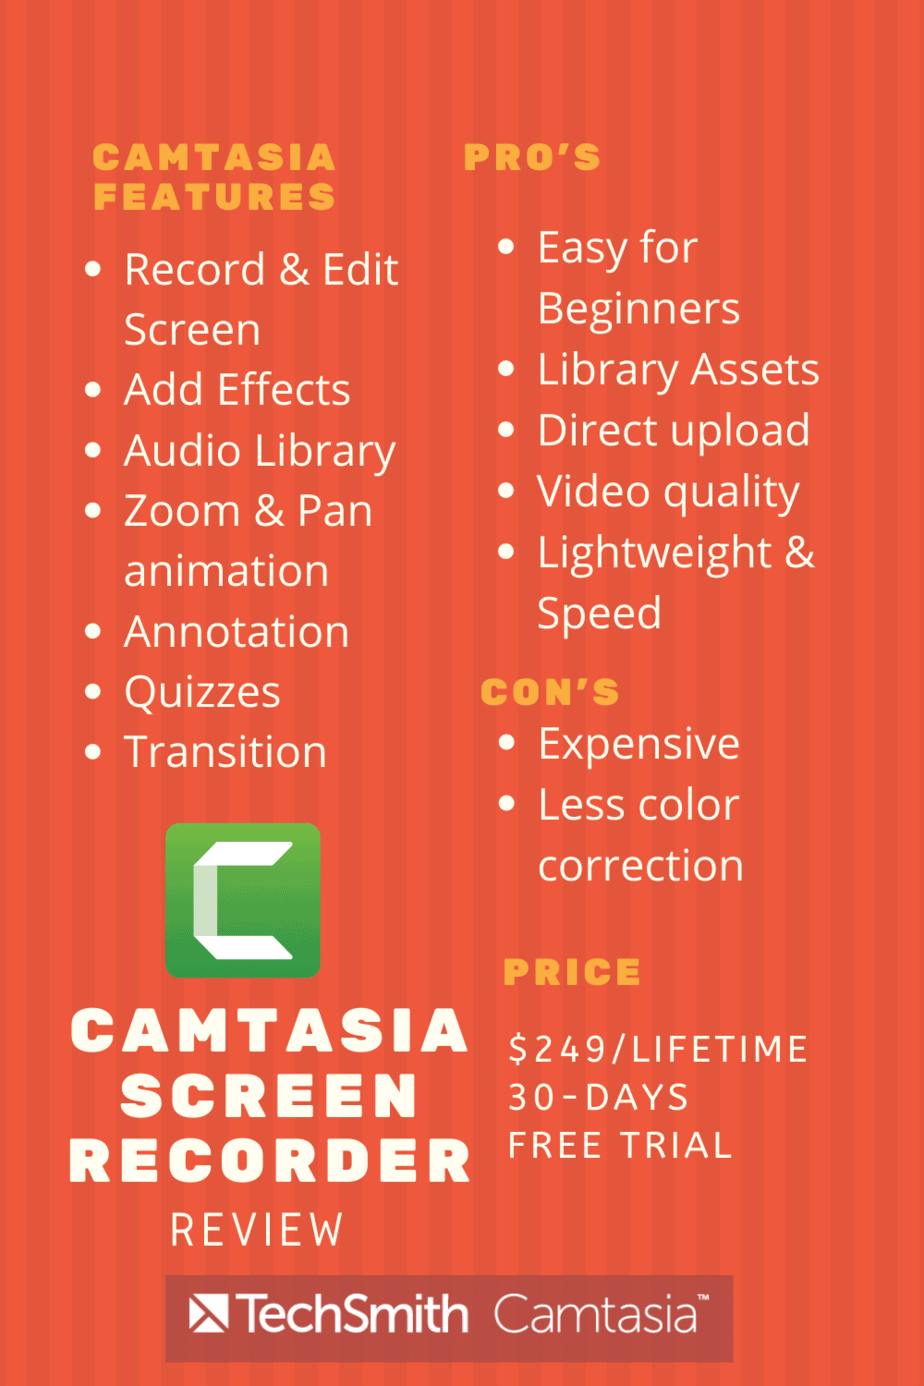 Camtasia Screen Recorder Review Pinterest Image